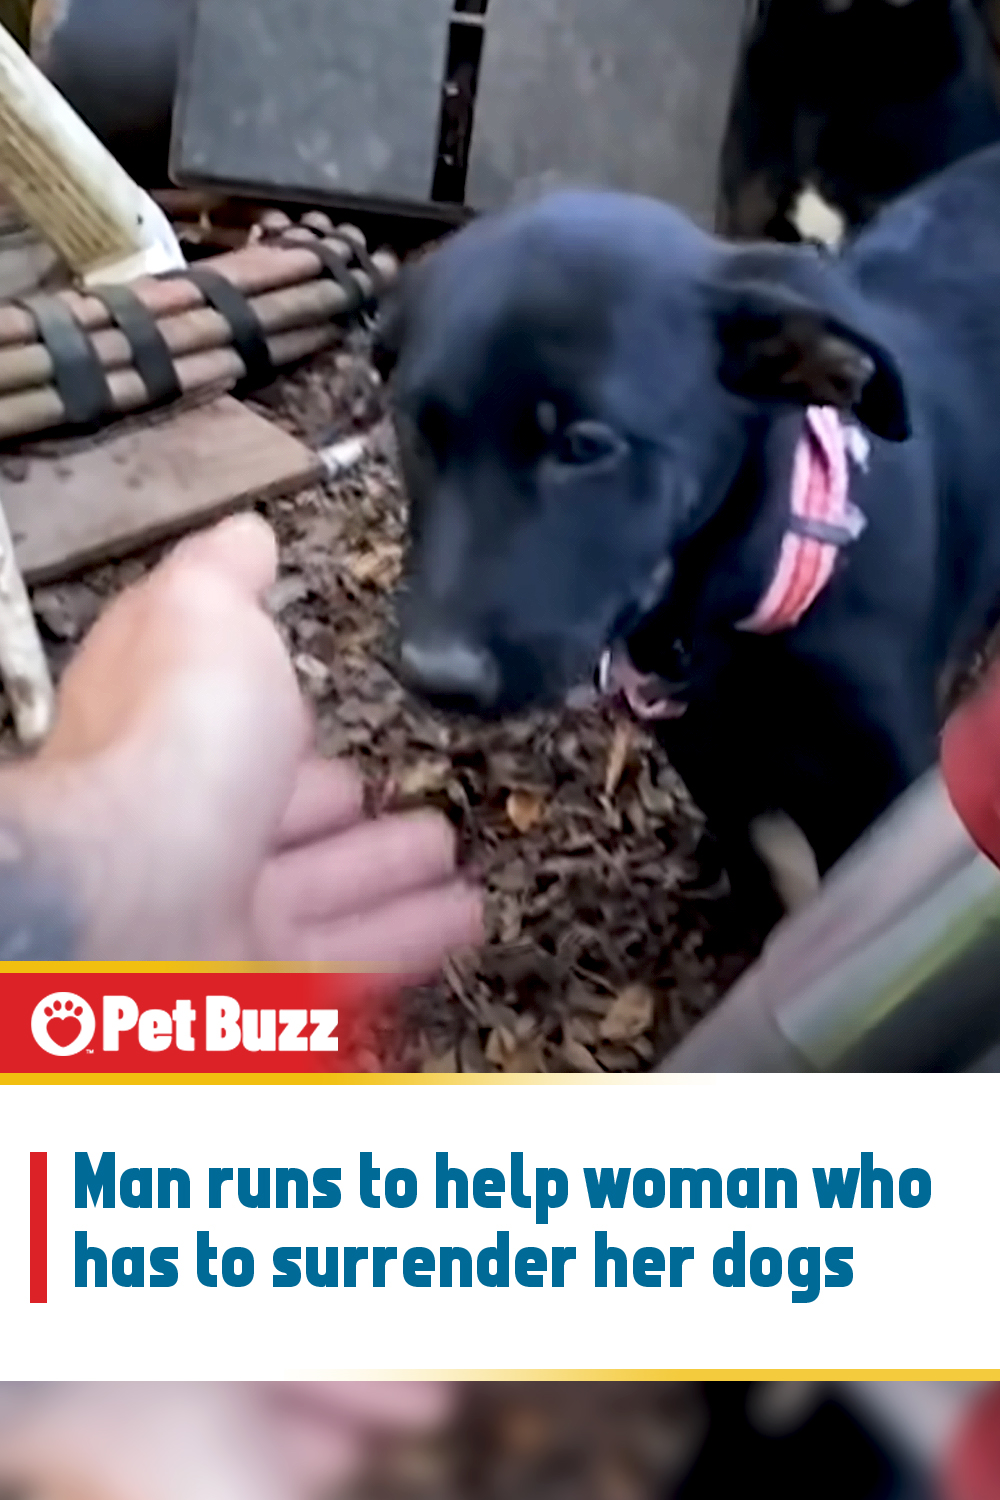 Man runs to help woman who has to surrender her dogs